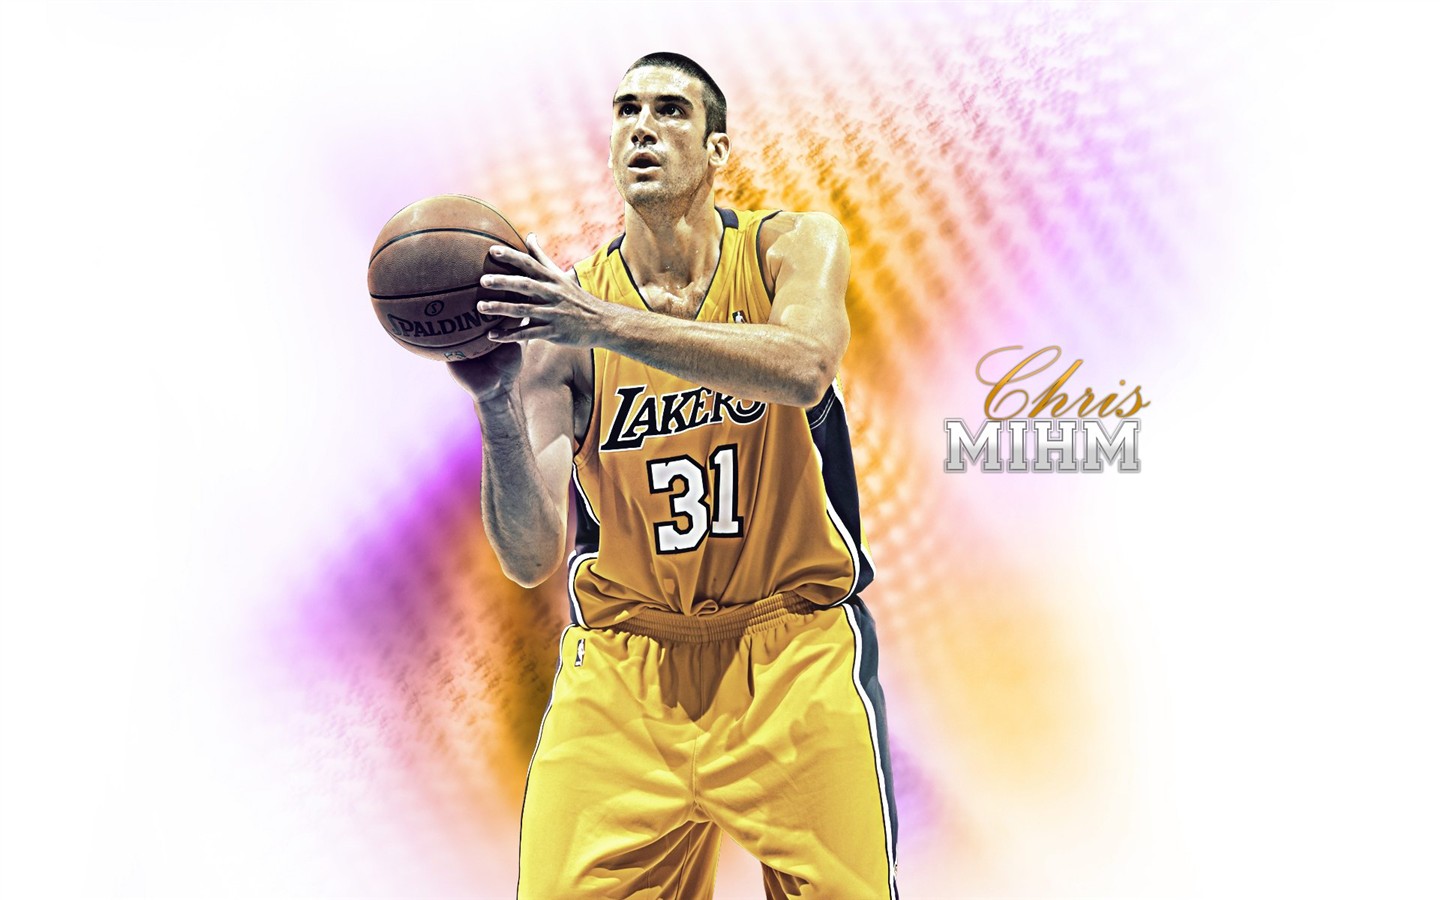 Los Angeles Lakers Official Wallpaper #5 - 1440x900